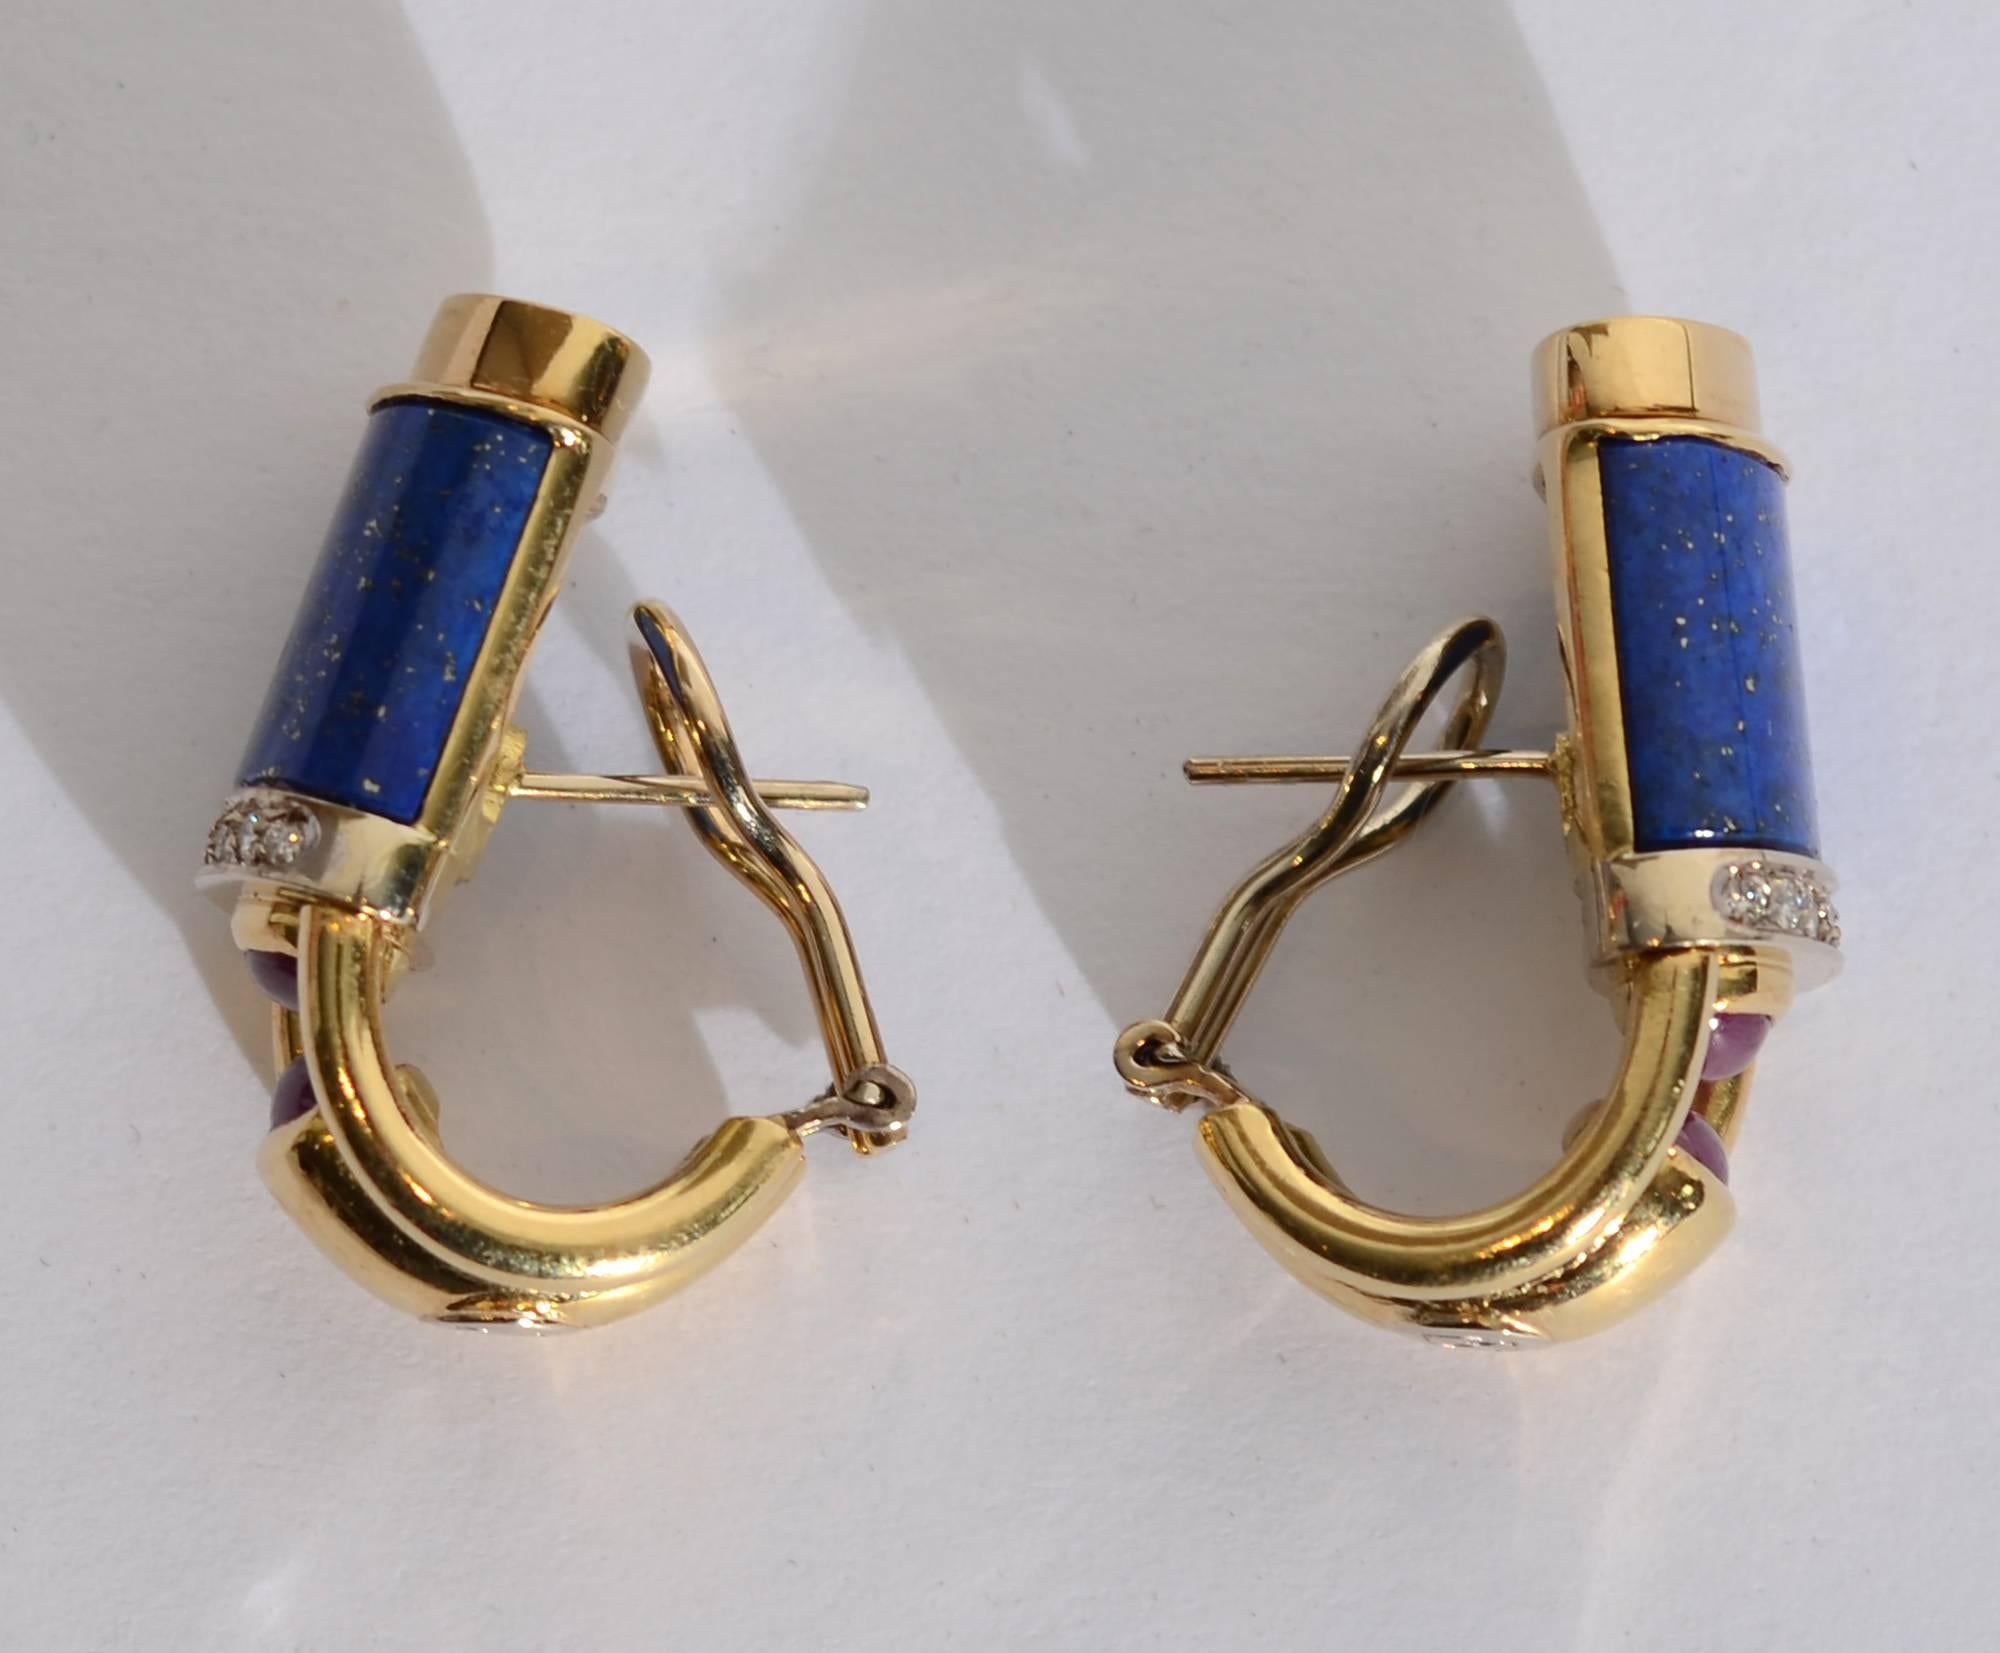 Striking earrings that are both colorful and architectural. Beautifully colored stones of lapis lazuli have 7 diamonds on the bottom of each. Below them is an imaginative placement of two cabochon rubies facing each other from the top and